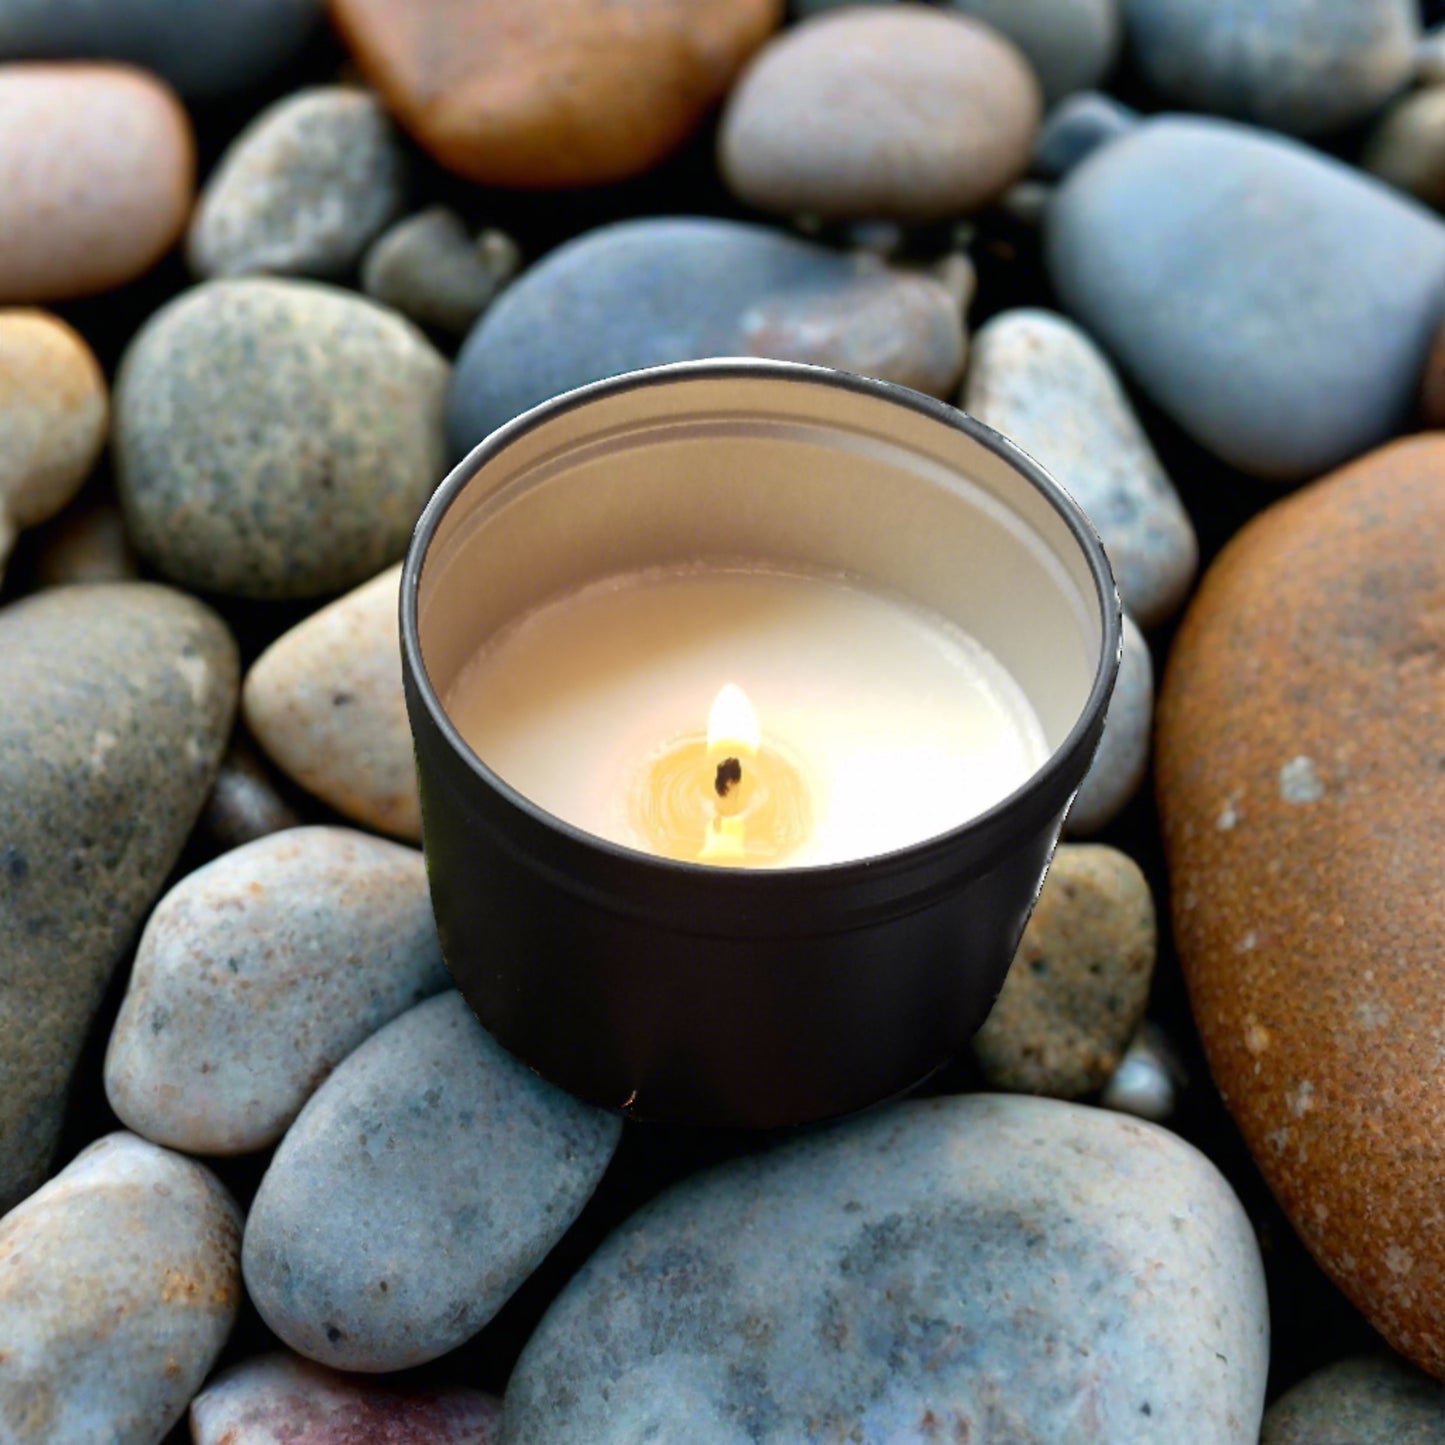 Marine Layer Seasalt Scented Soy Wax Candle